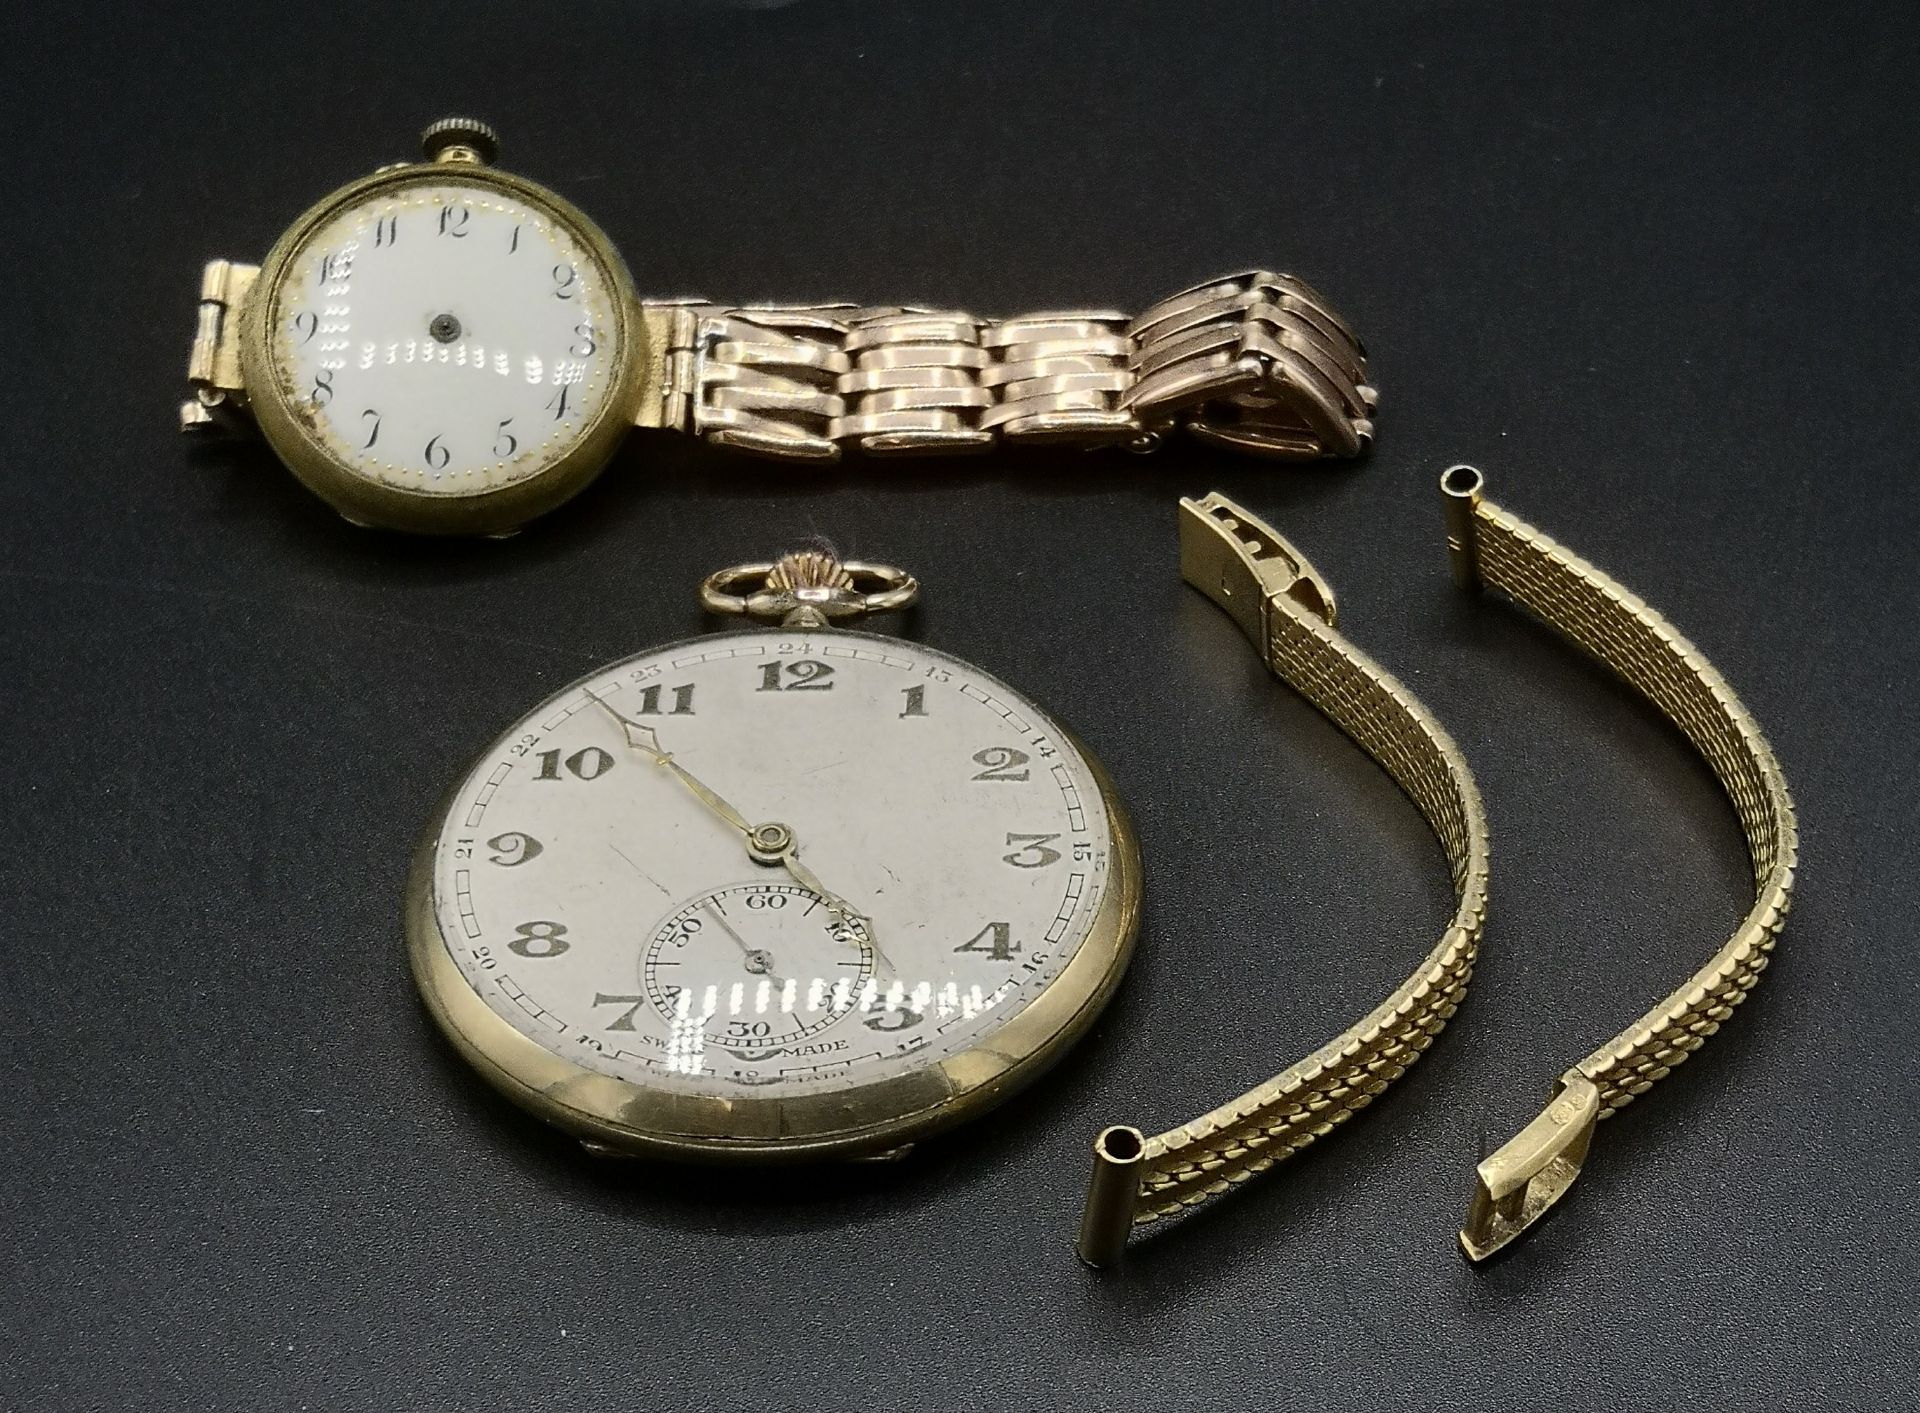 18ct gold case wrist watch together with a Swiss made wrist watch - Image 2 of 7